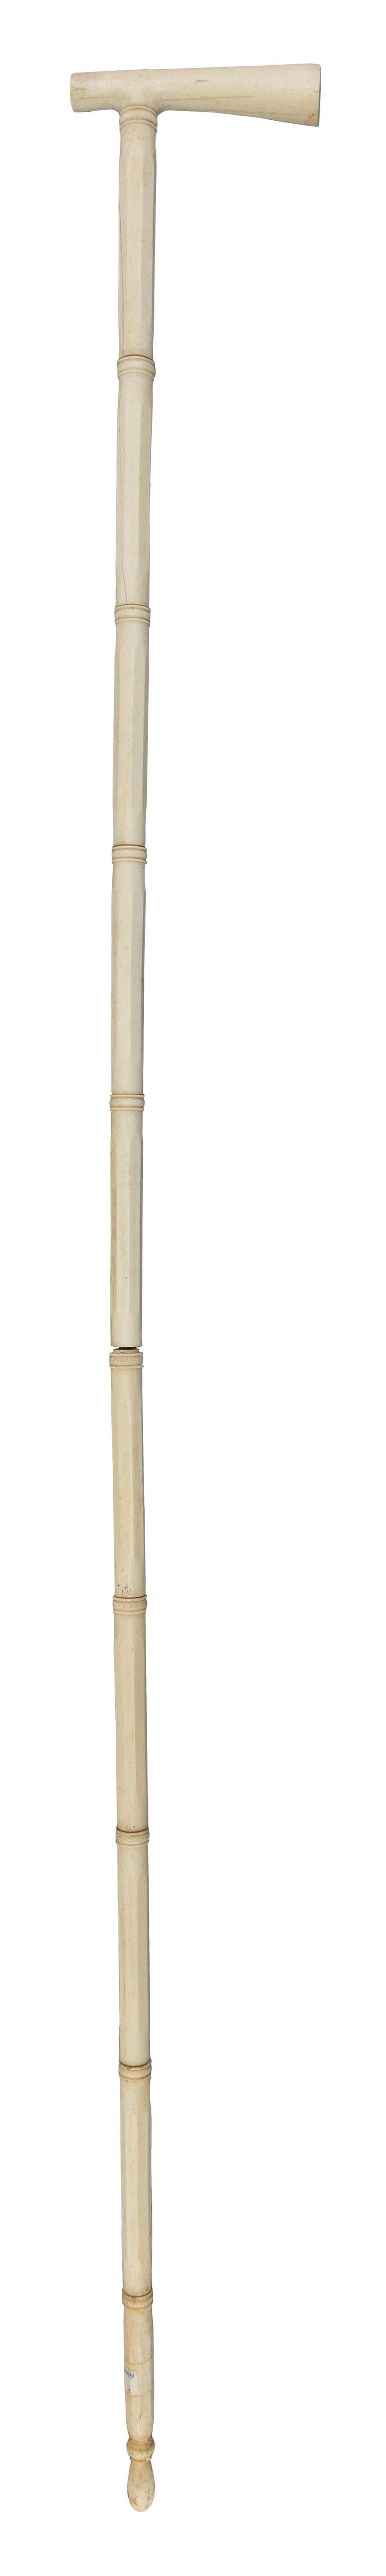 CARVED IVORY TWO-PART CANE 19TH